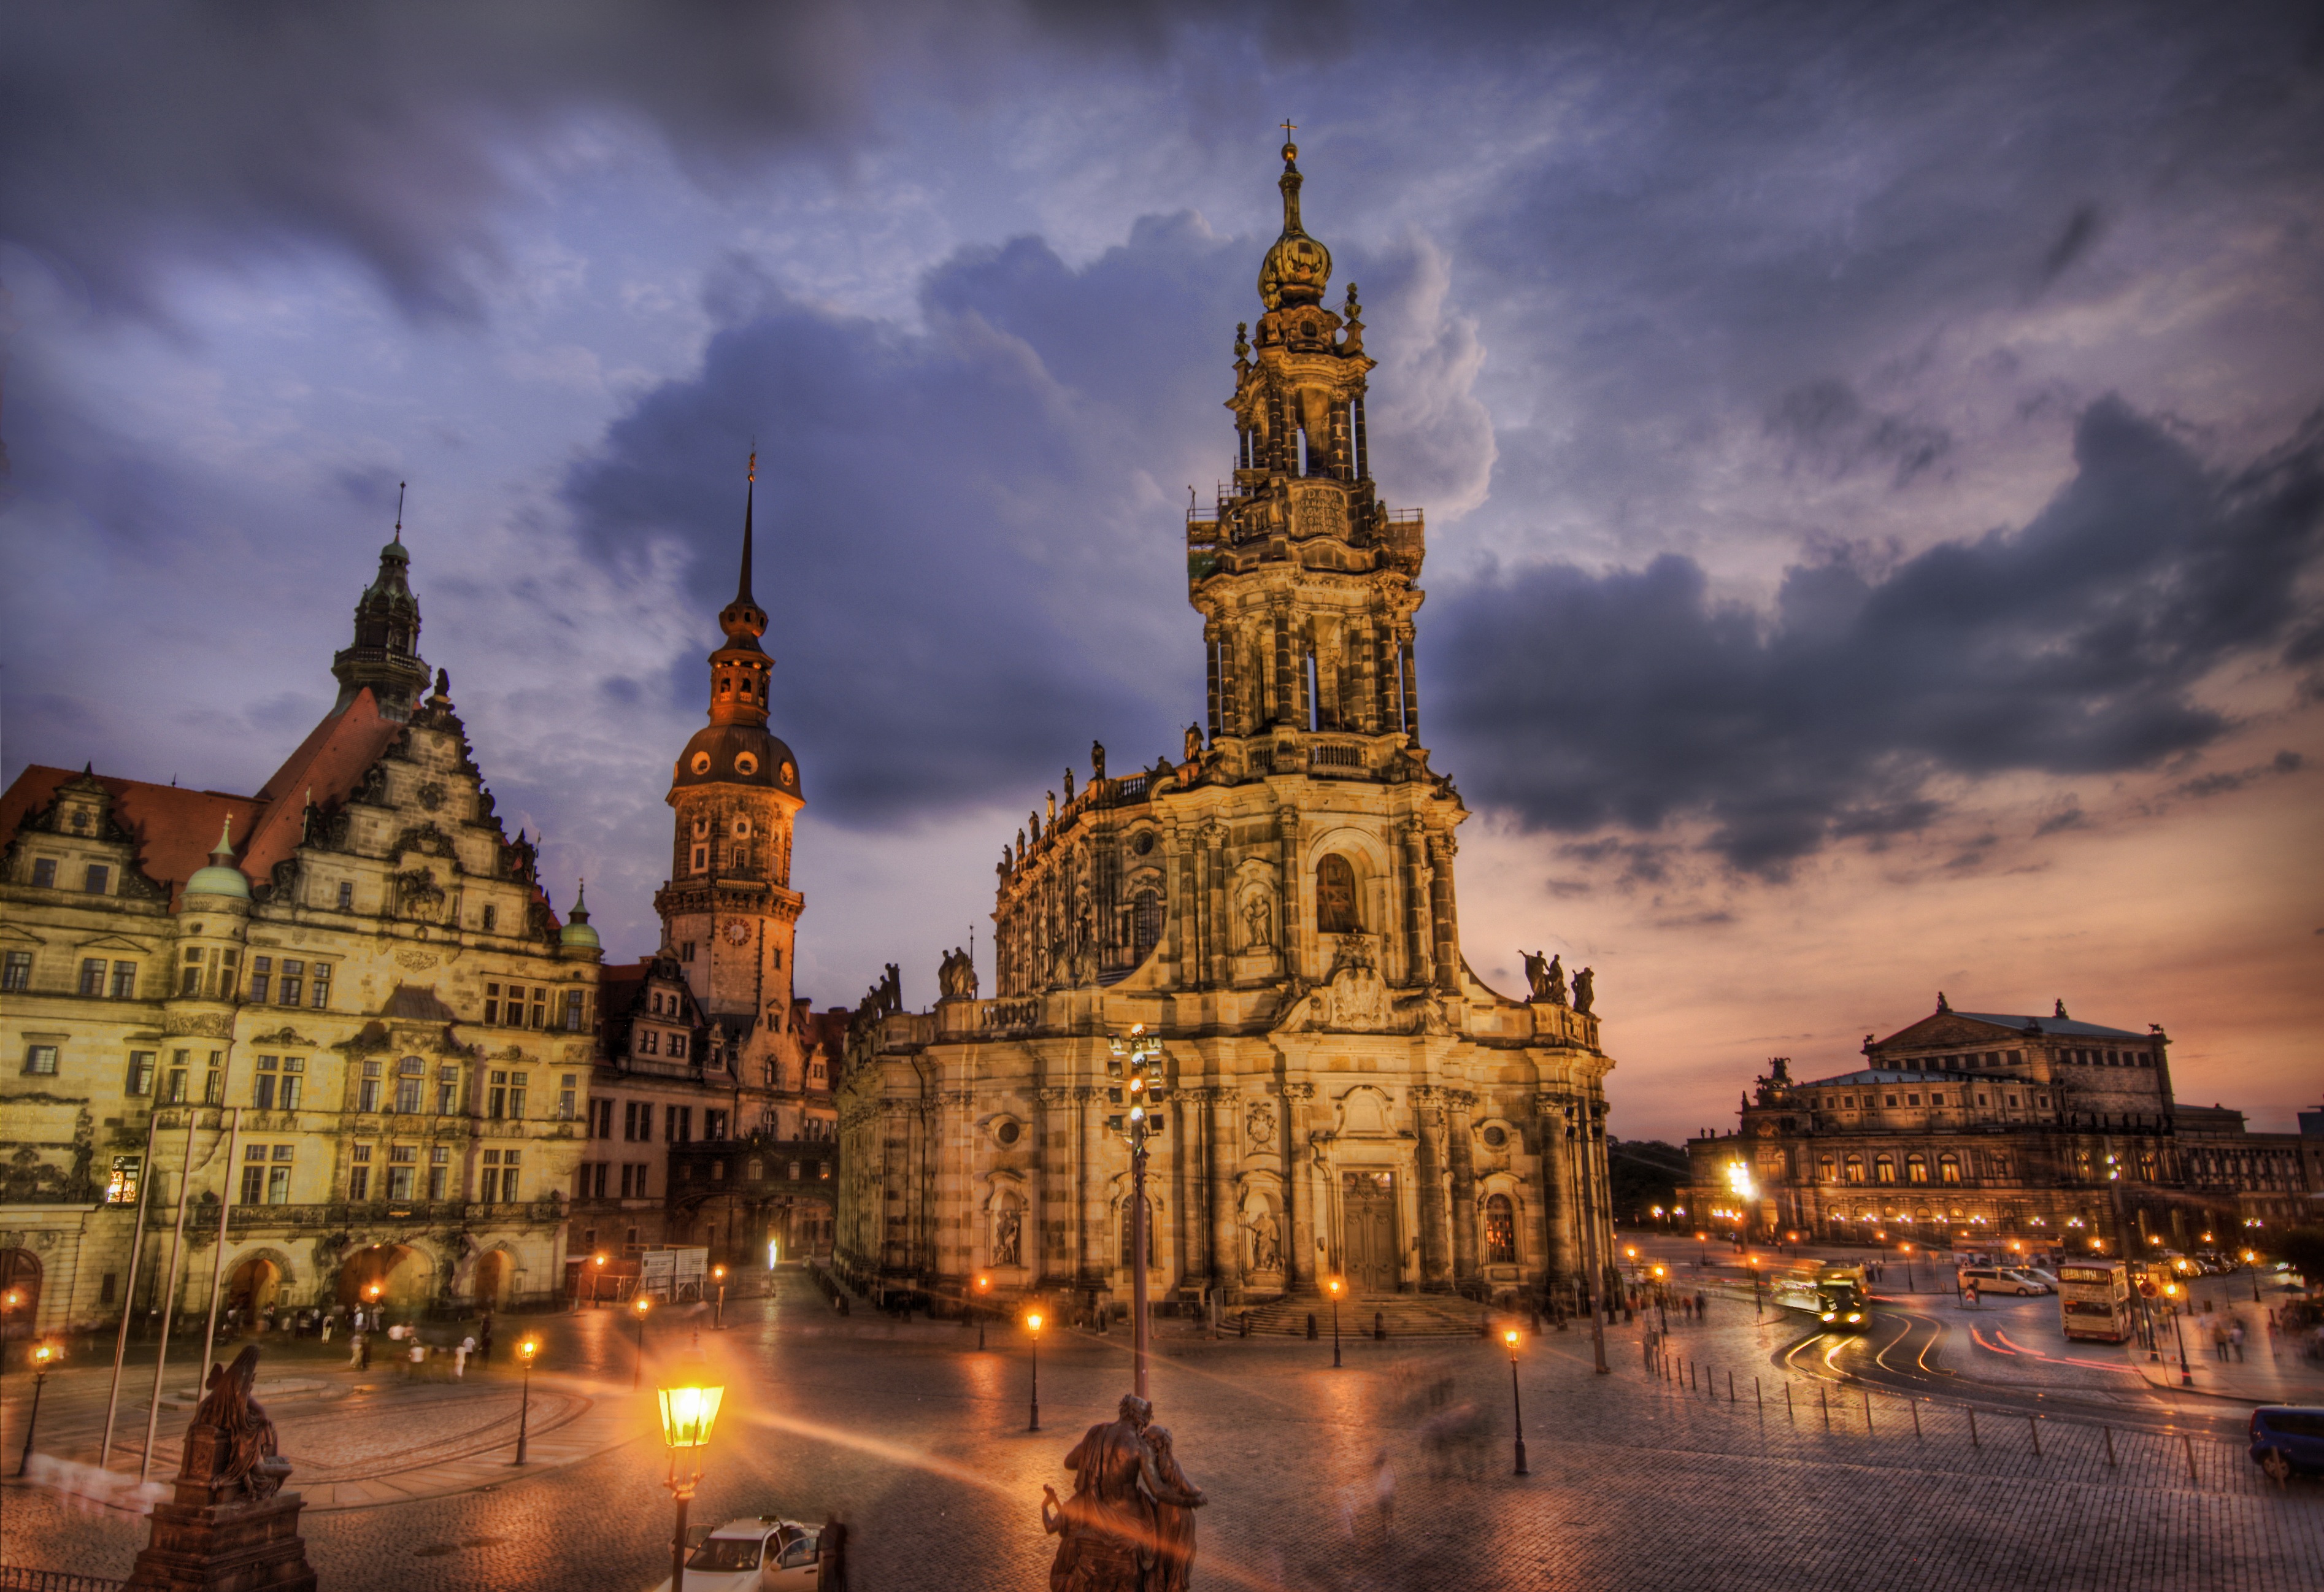 Cathedral in Dresden, Germany by Trey Ratcliff